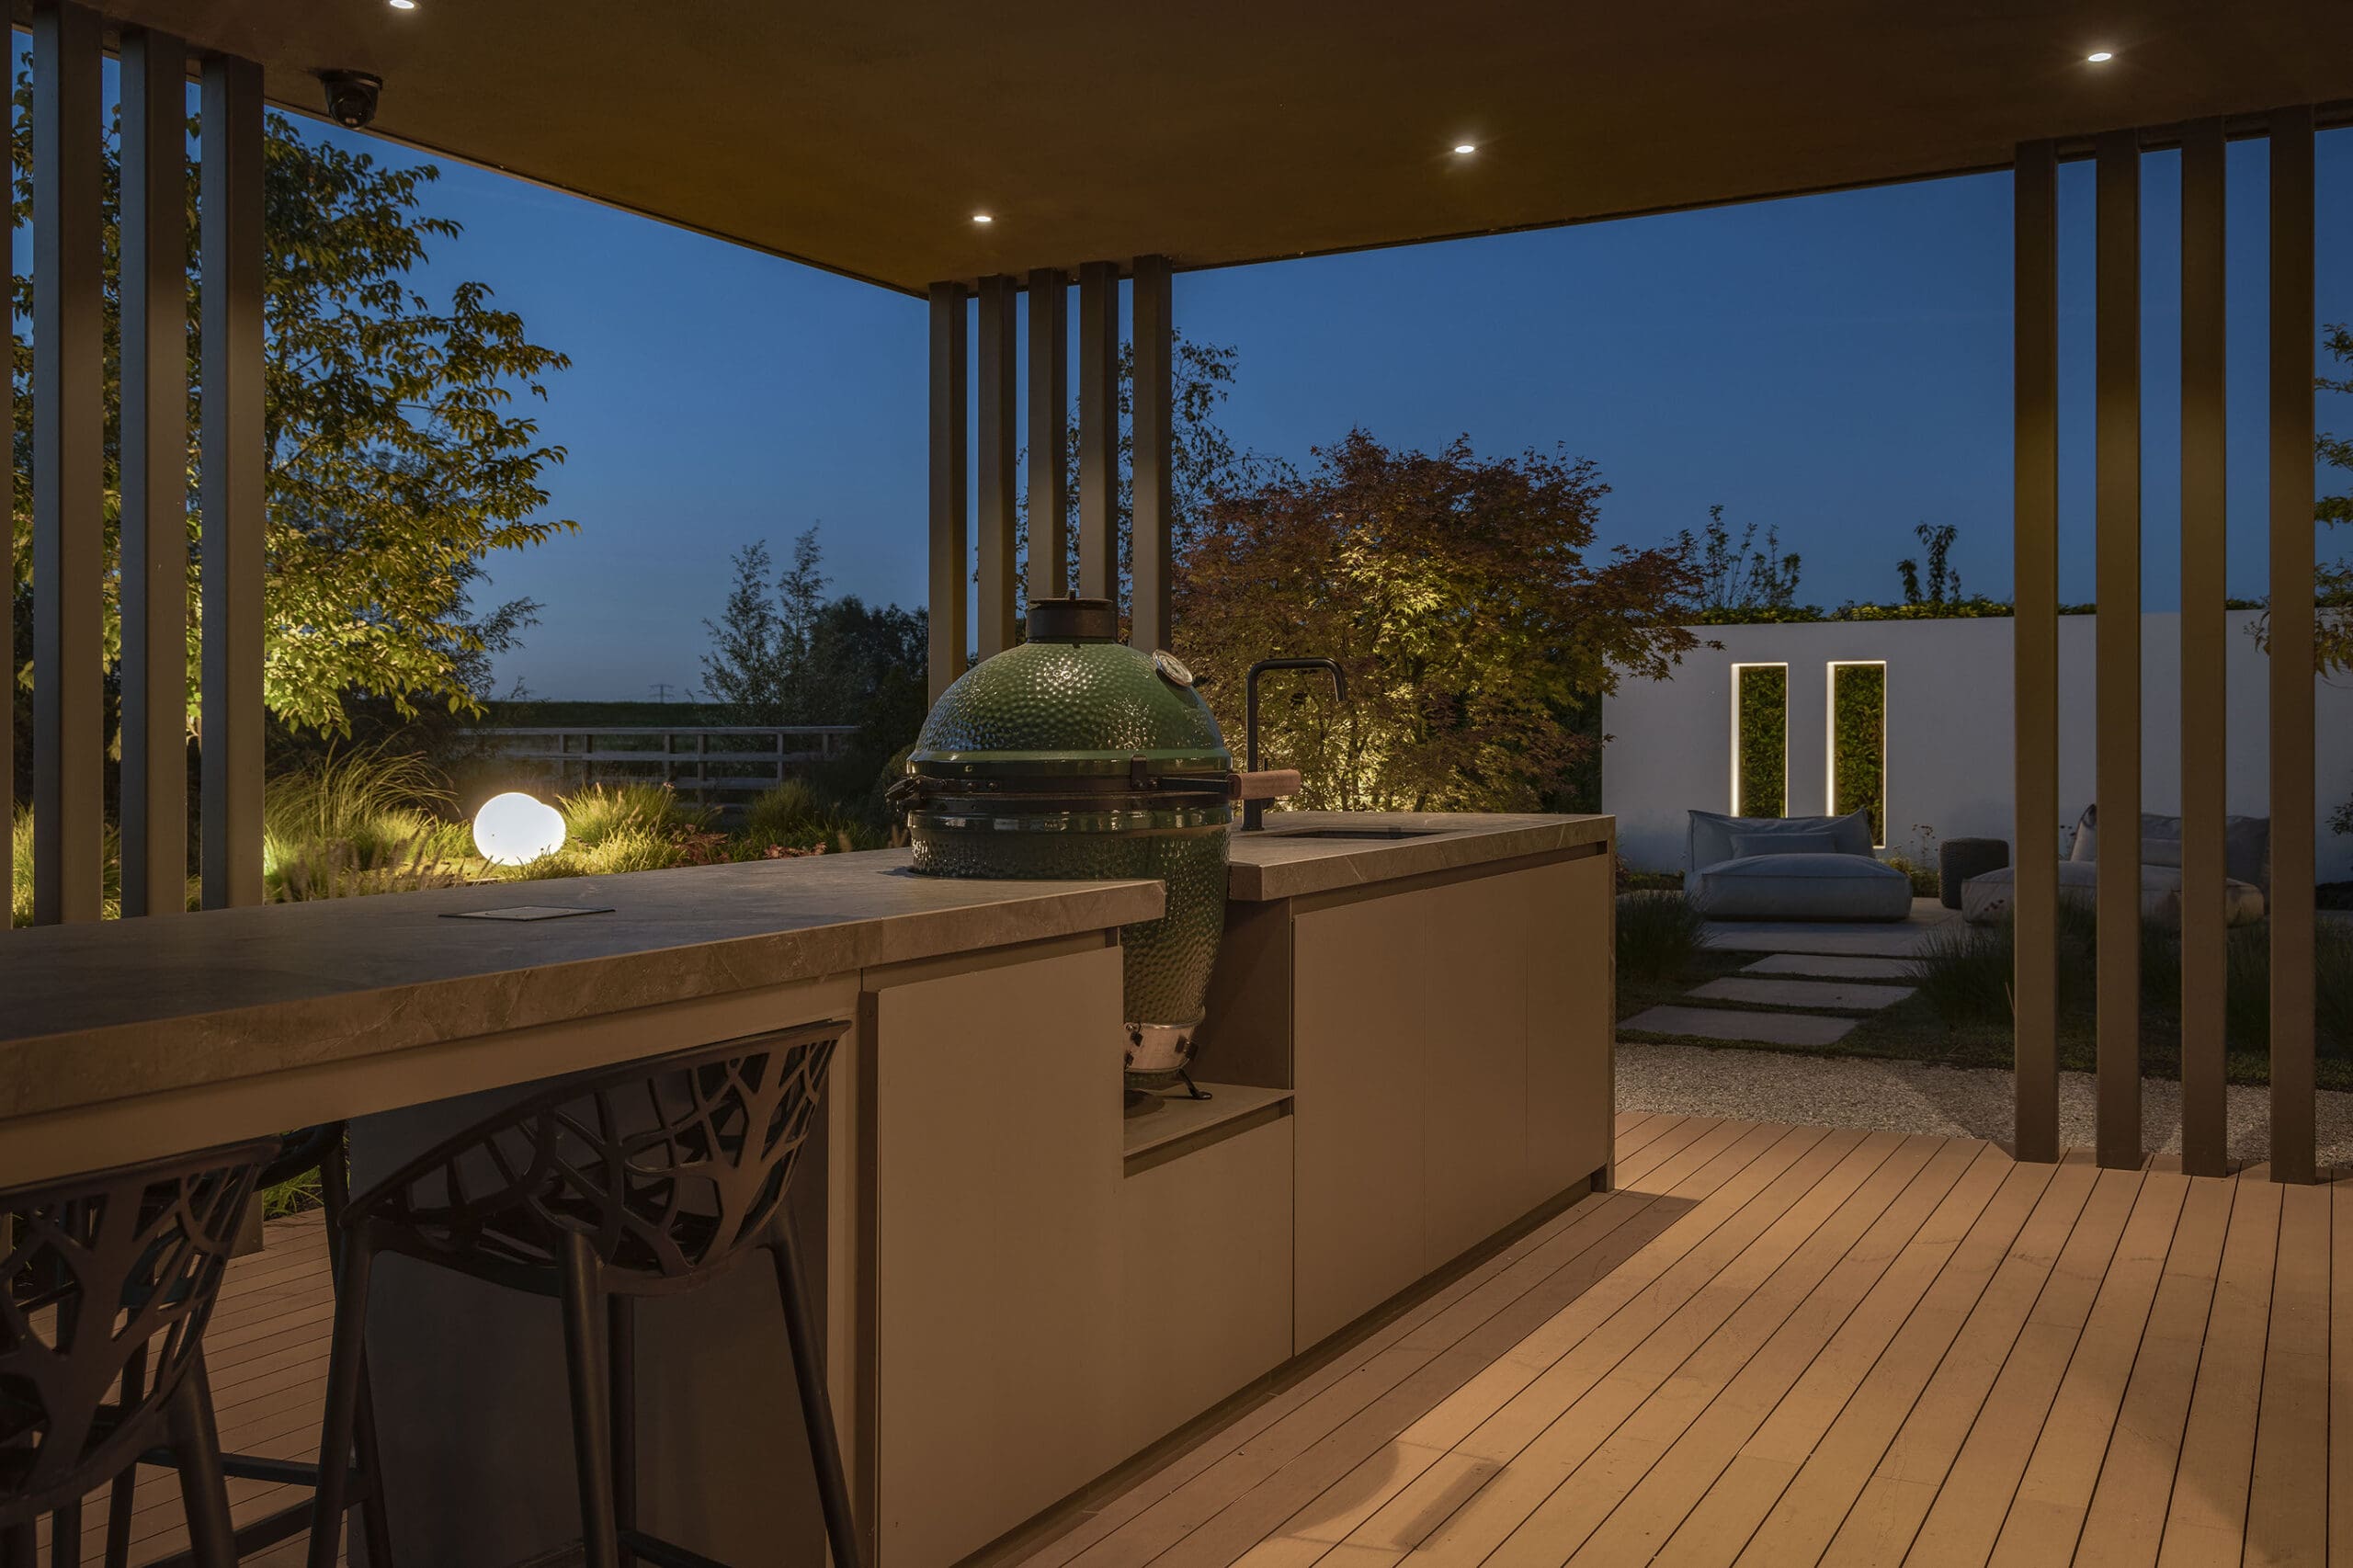 XL luxury outdoor kitchen with Big Green Egg